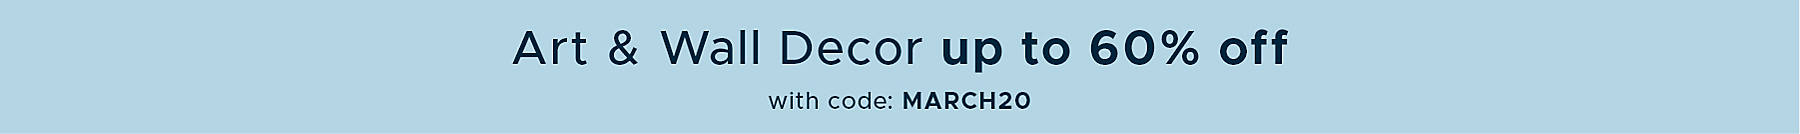 this weekend only Art & Wall Decor up to 60% off with code: MARCH20